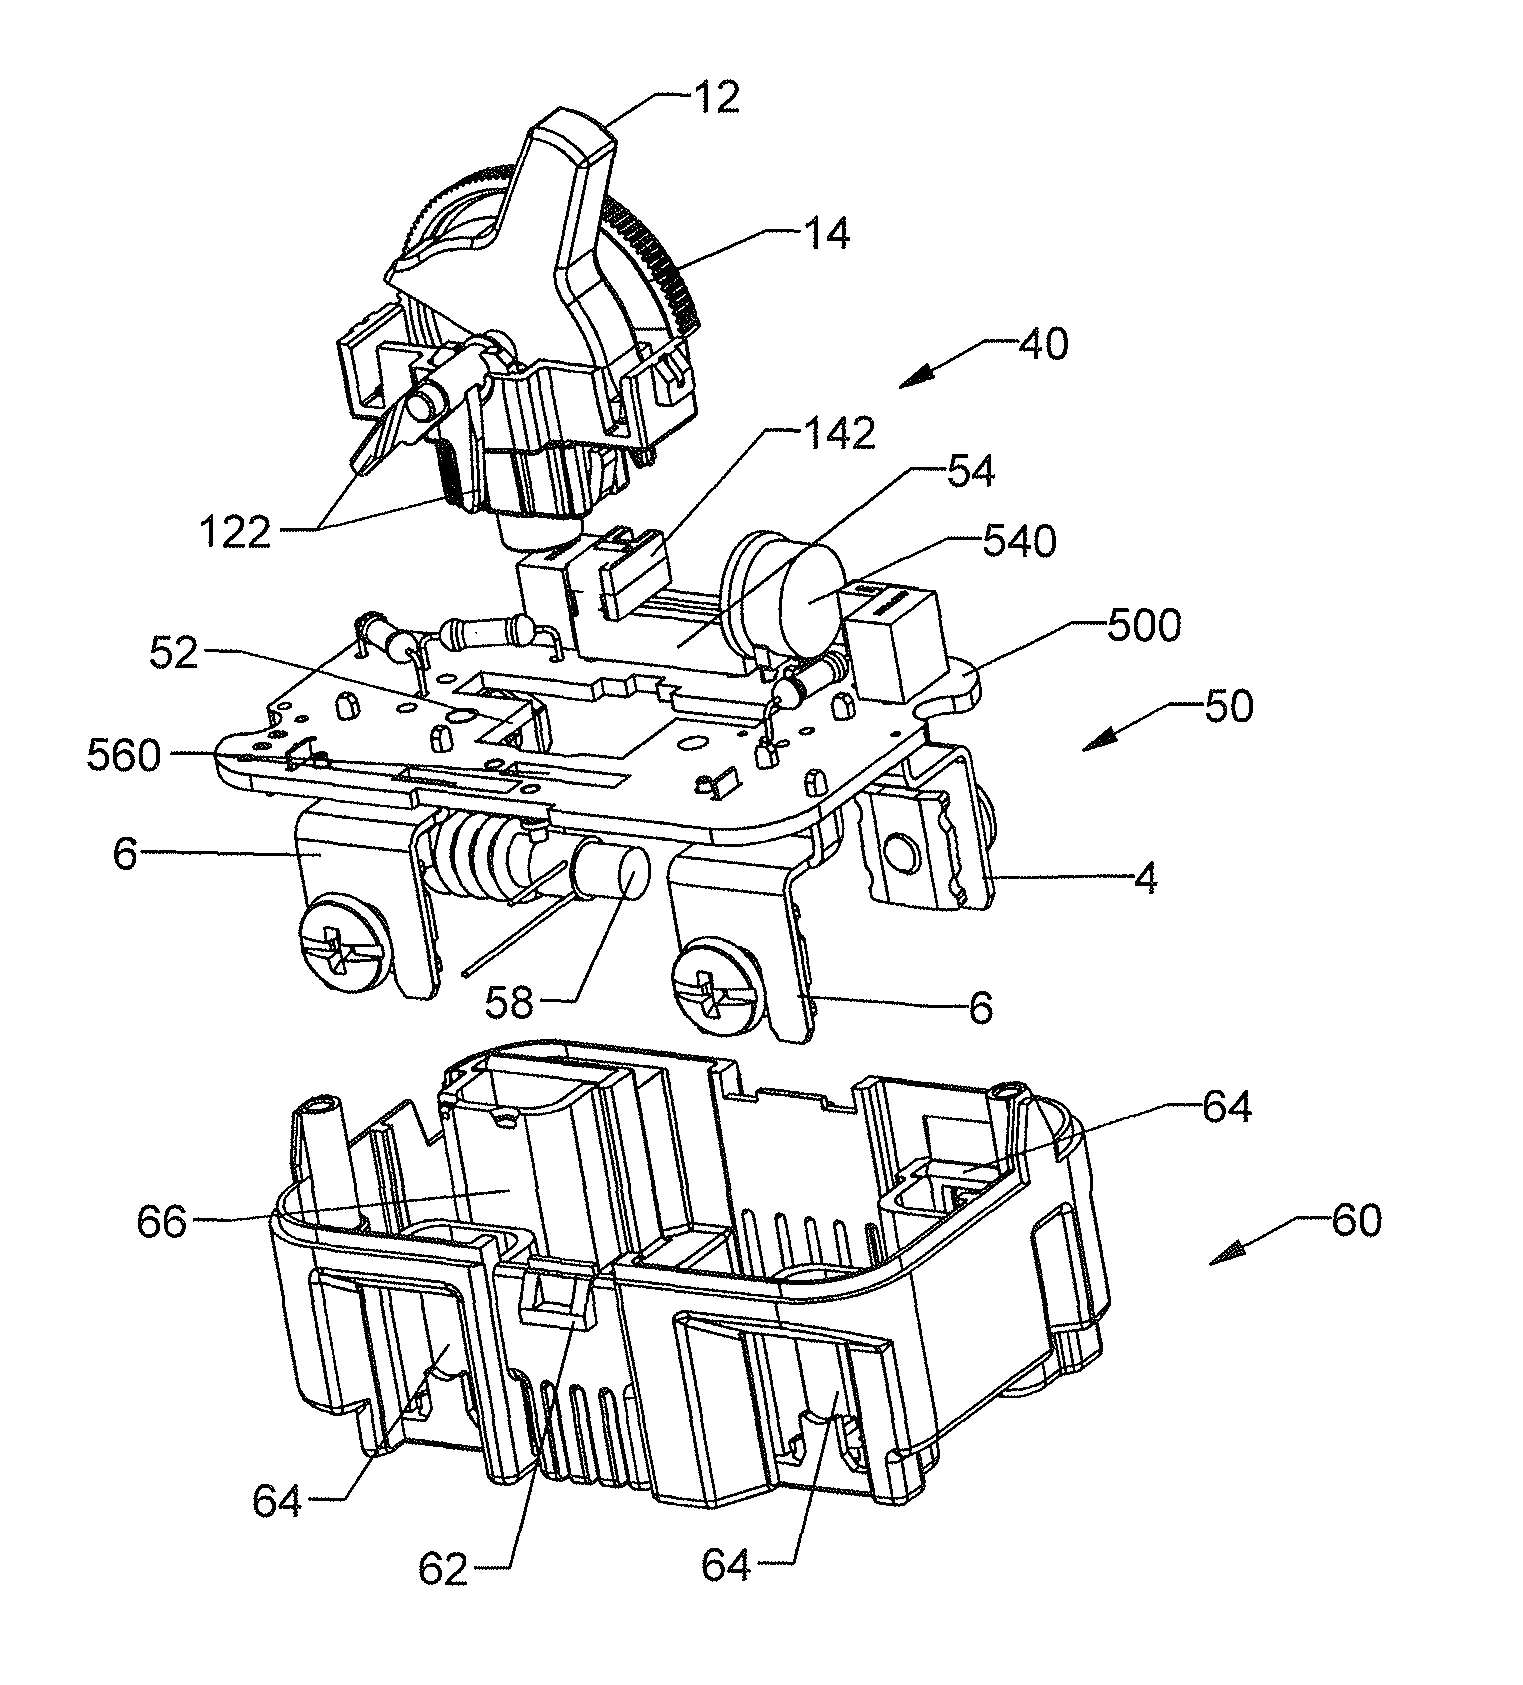 Toggle switch and variable actuator control